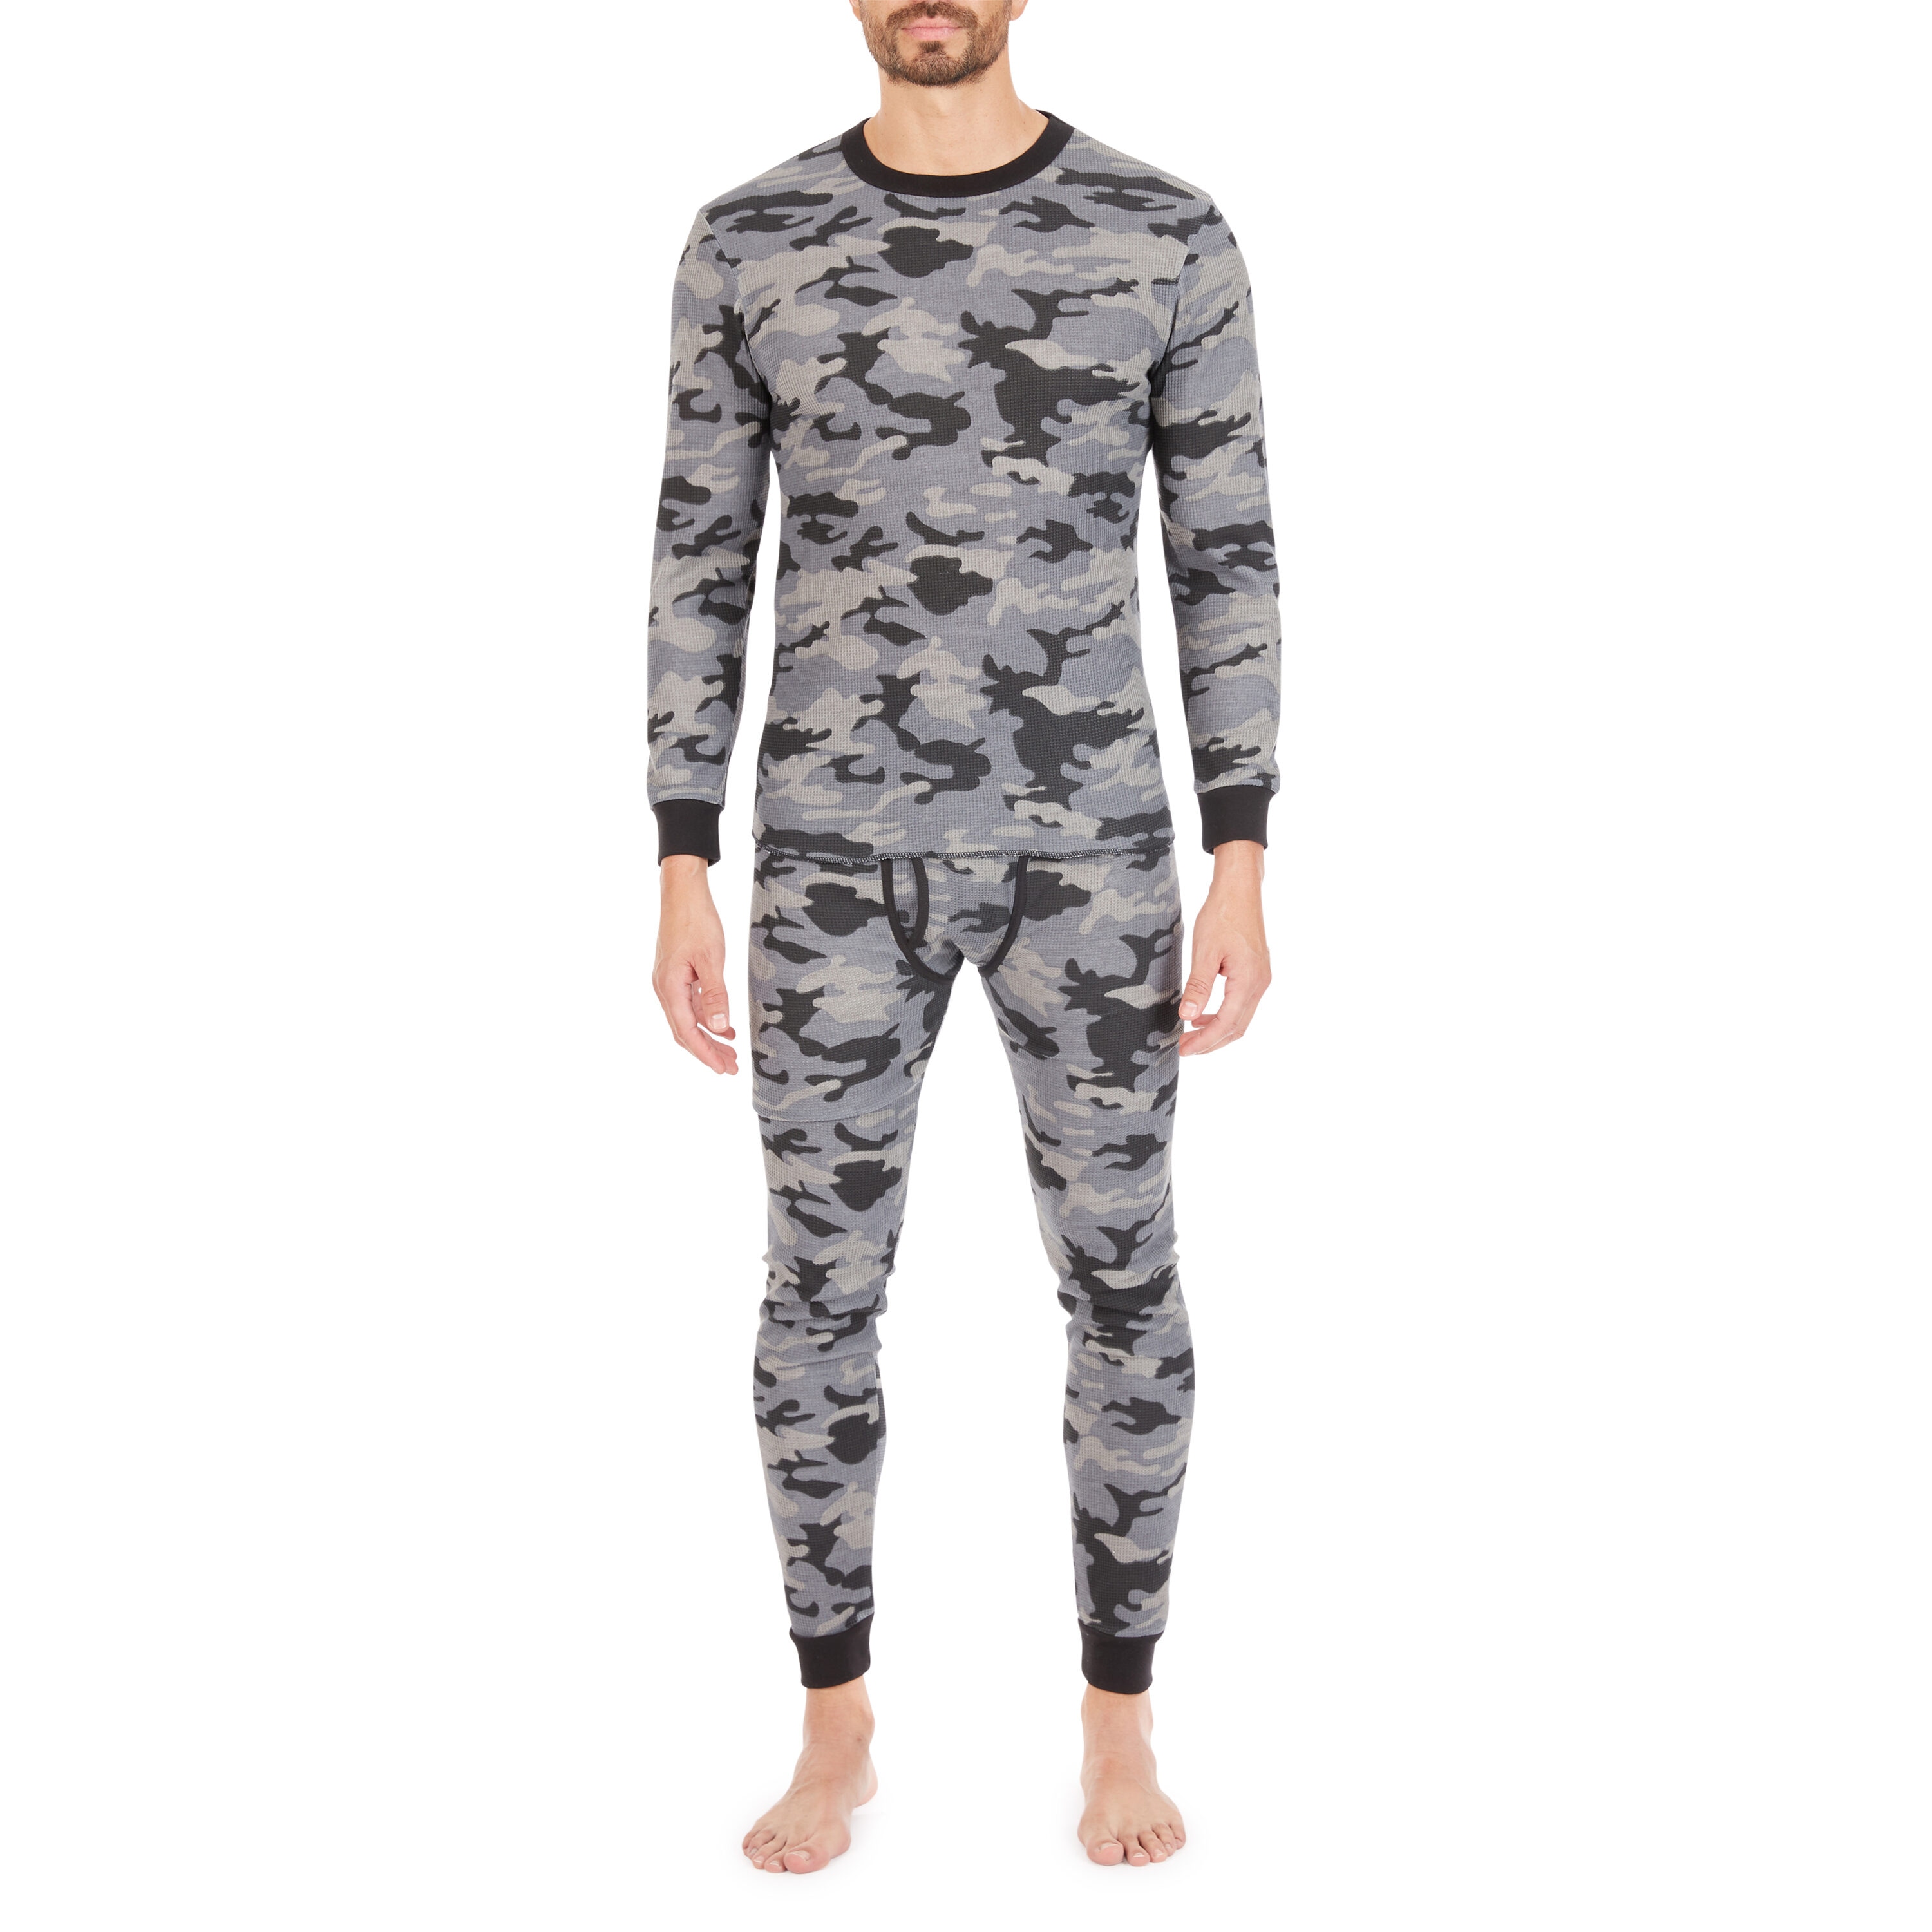 Smith's Workwear Black Camo-199g Cotton/Polyester Thermal Base Layer (Medium)  in the Thermals department at